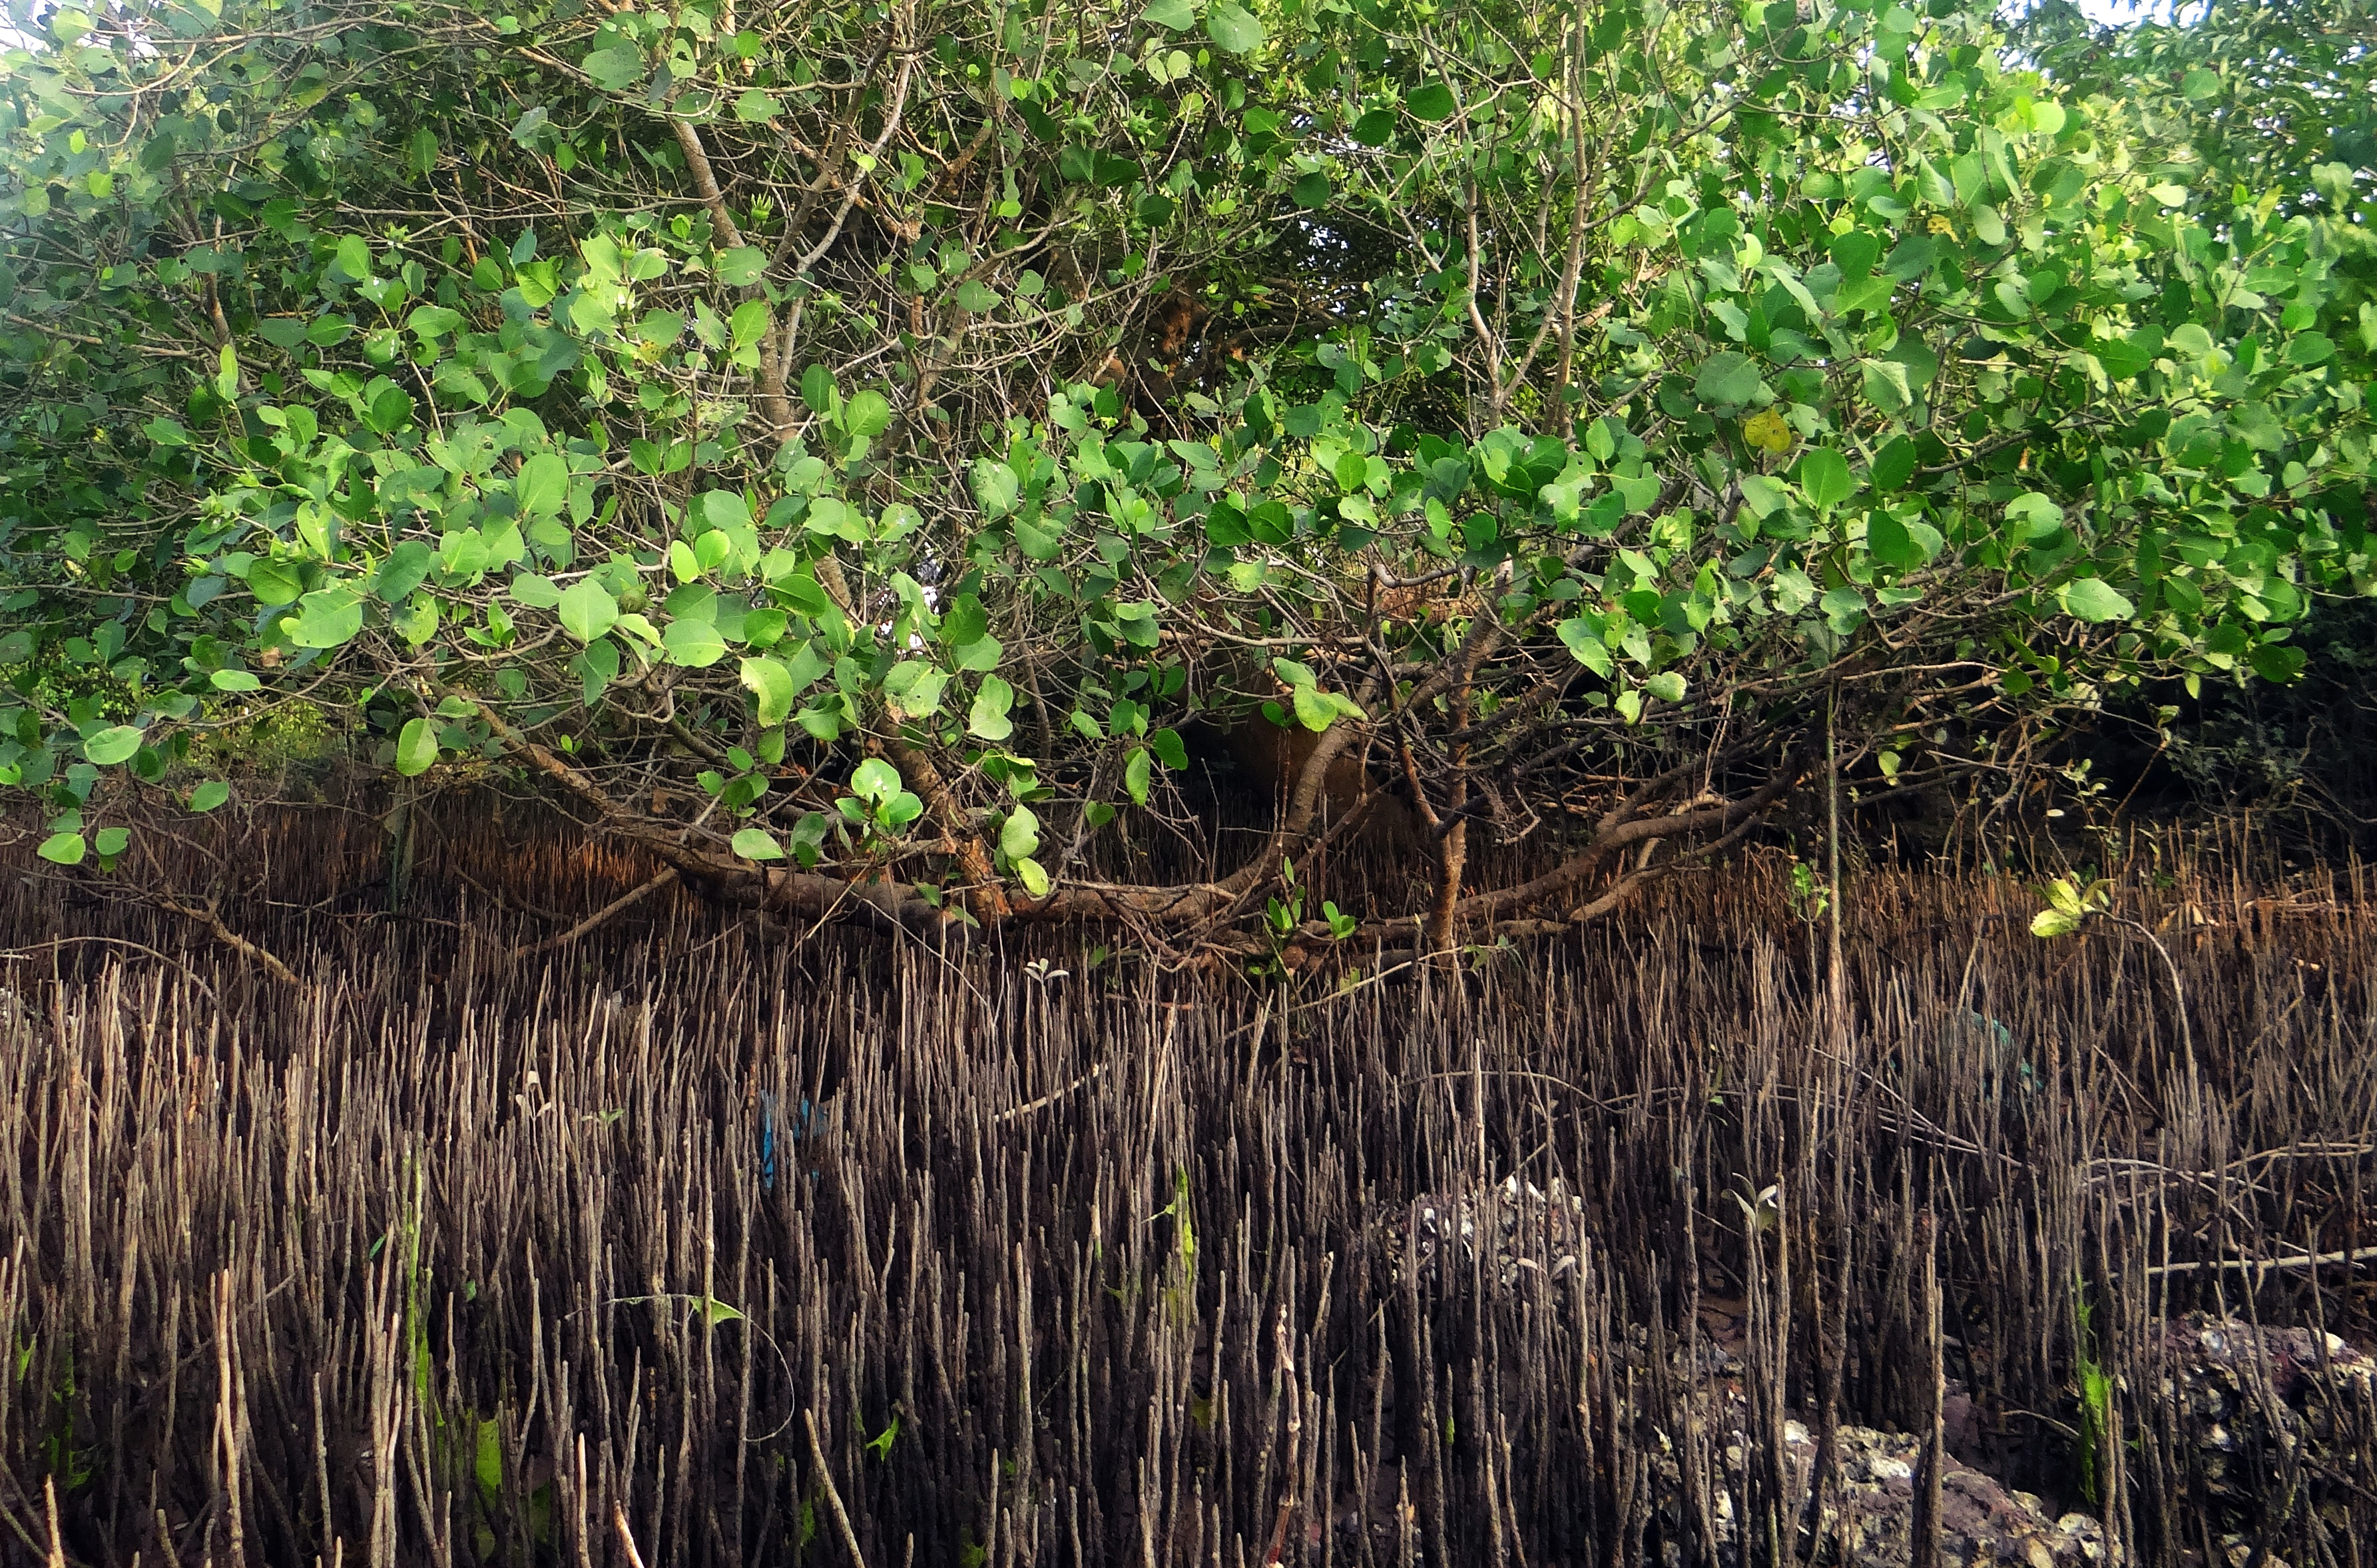 Mangroves in India